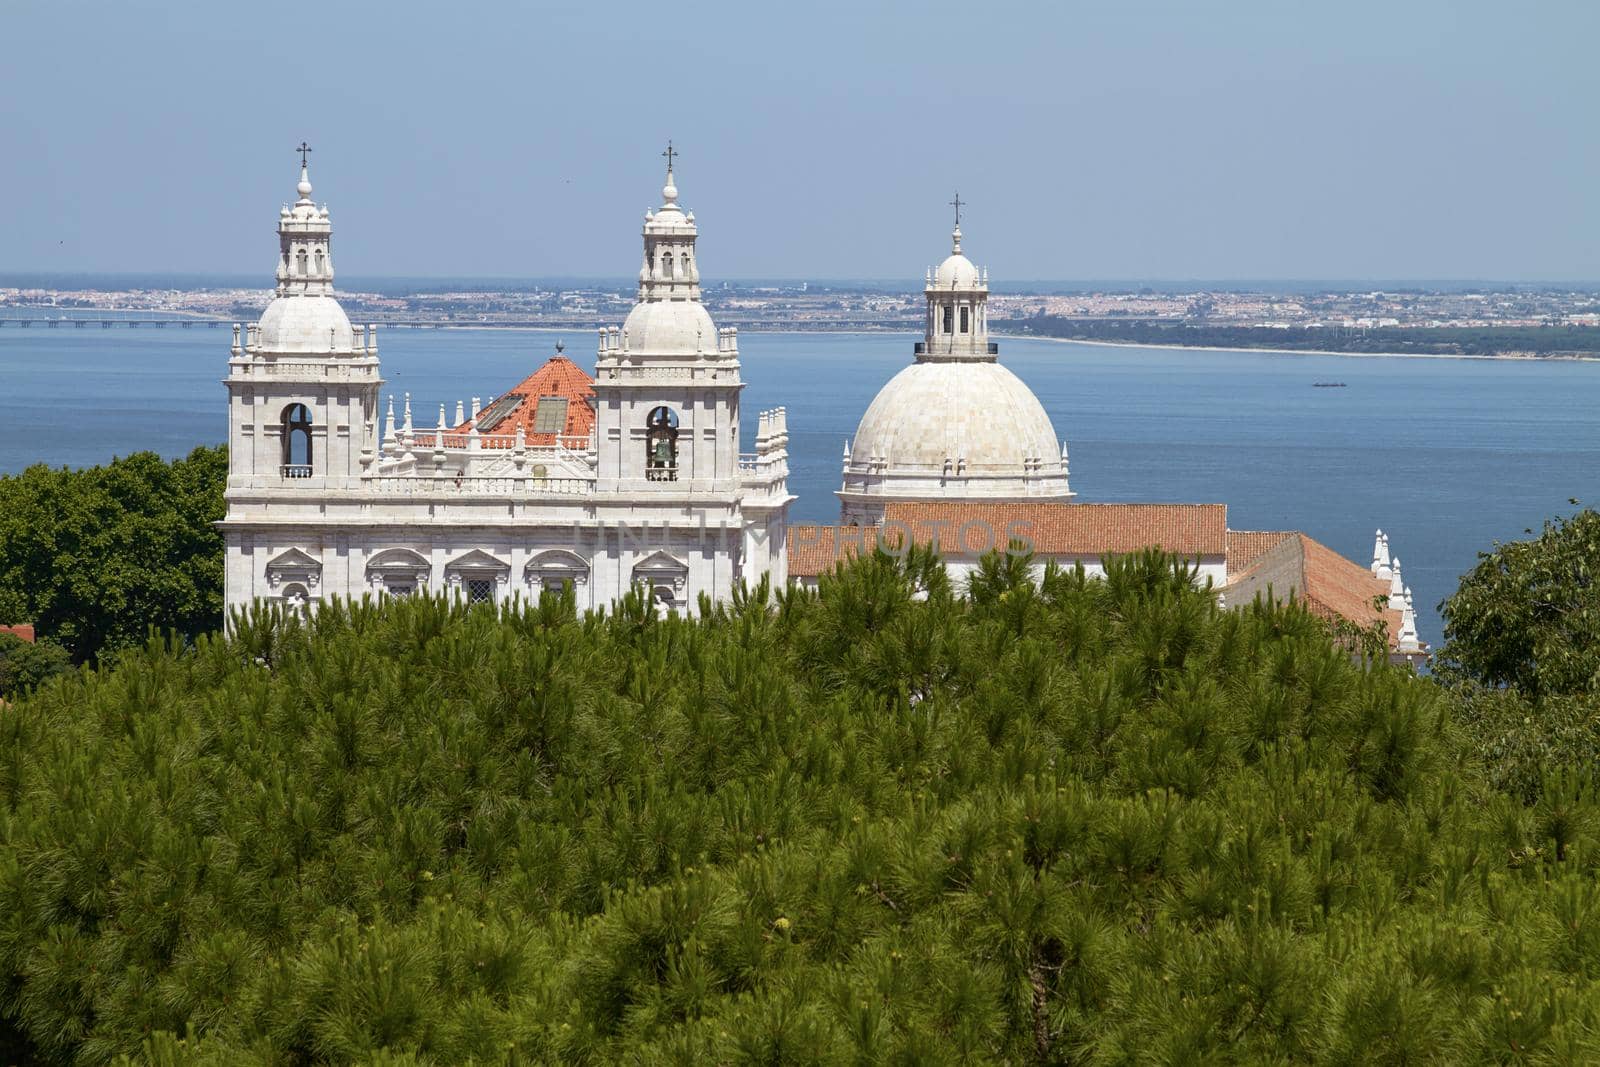 Church of Santa Engracia, Lisbon, Portugal with the ocean in the background